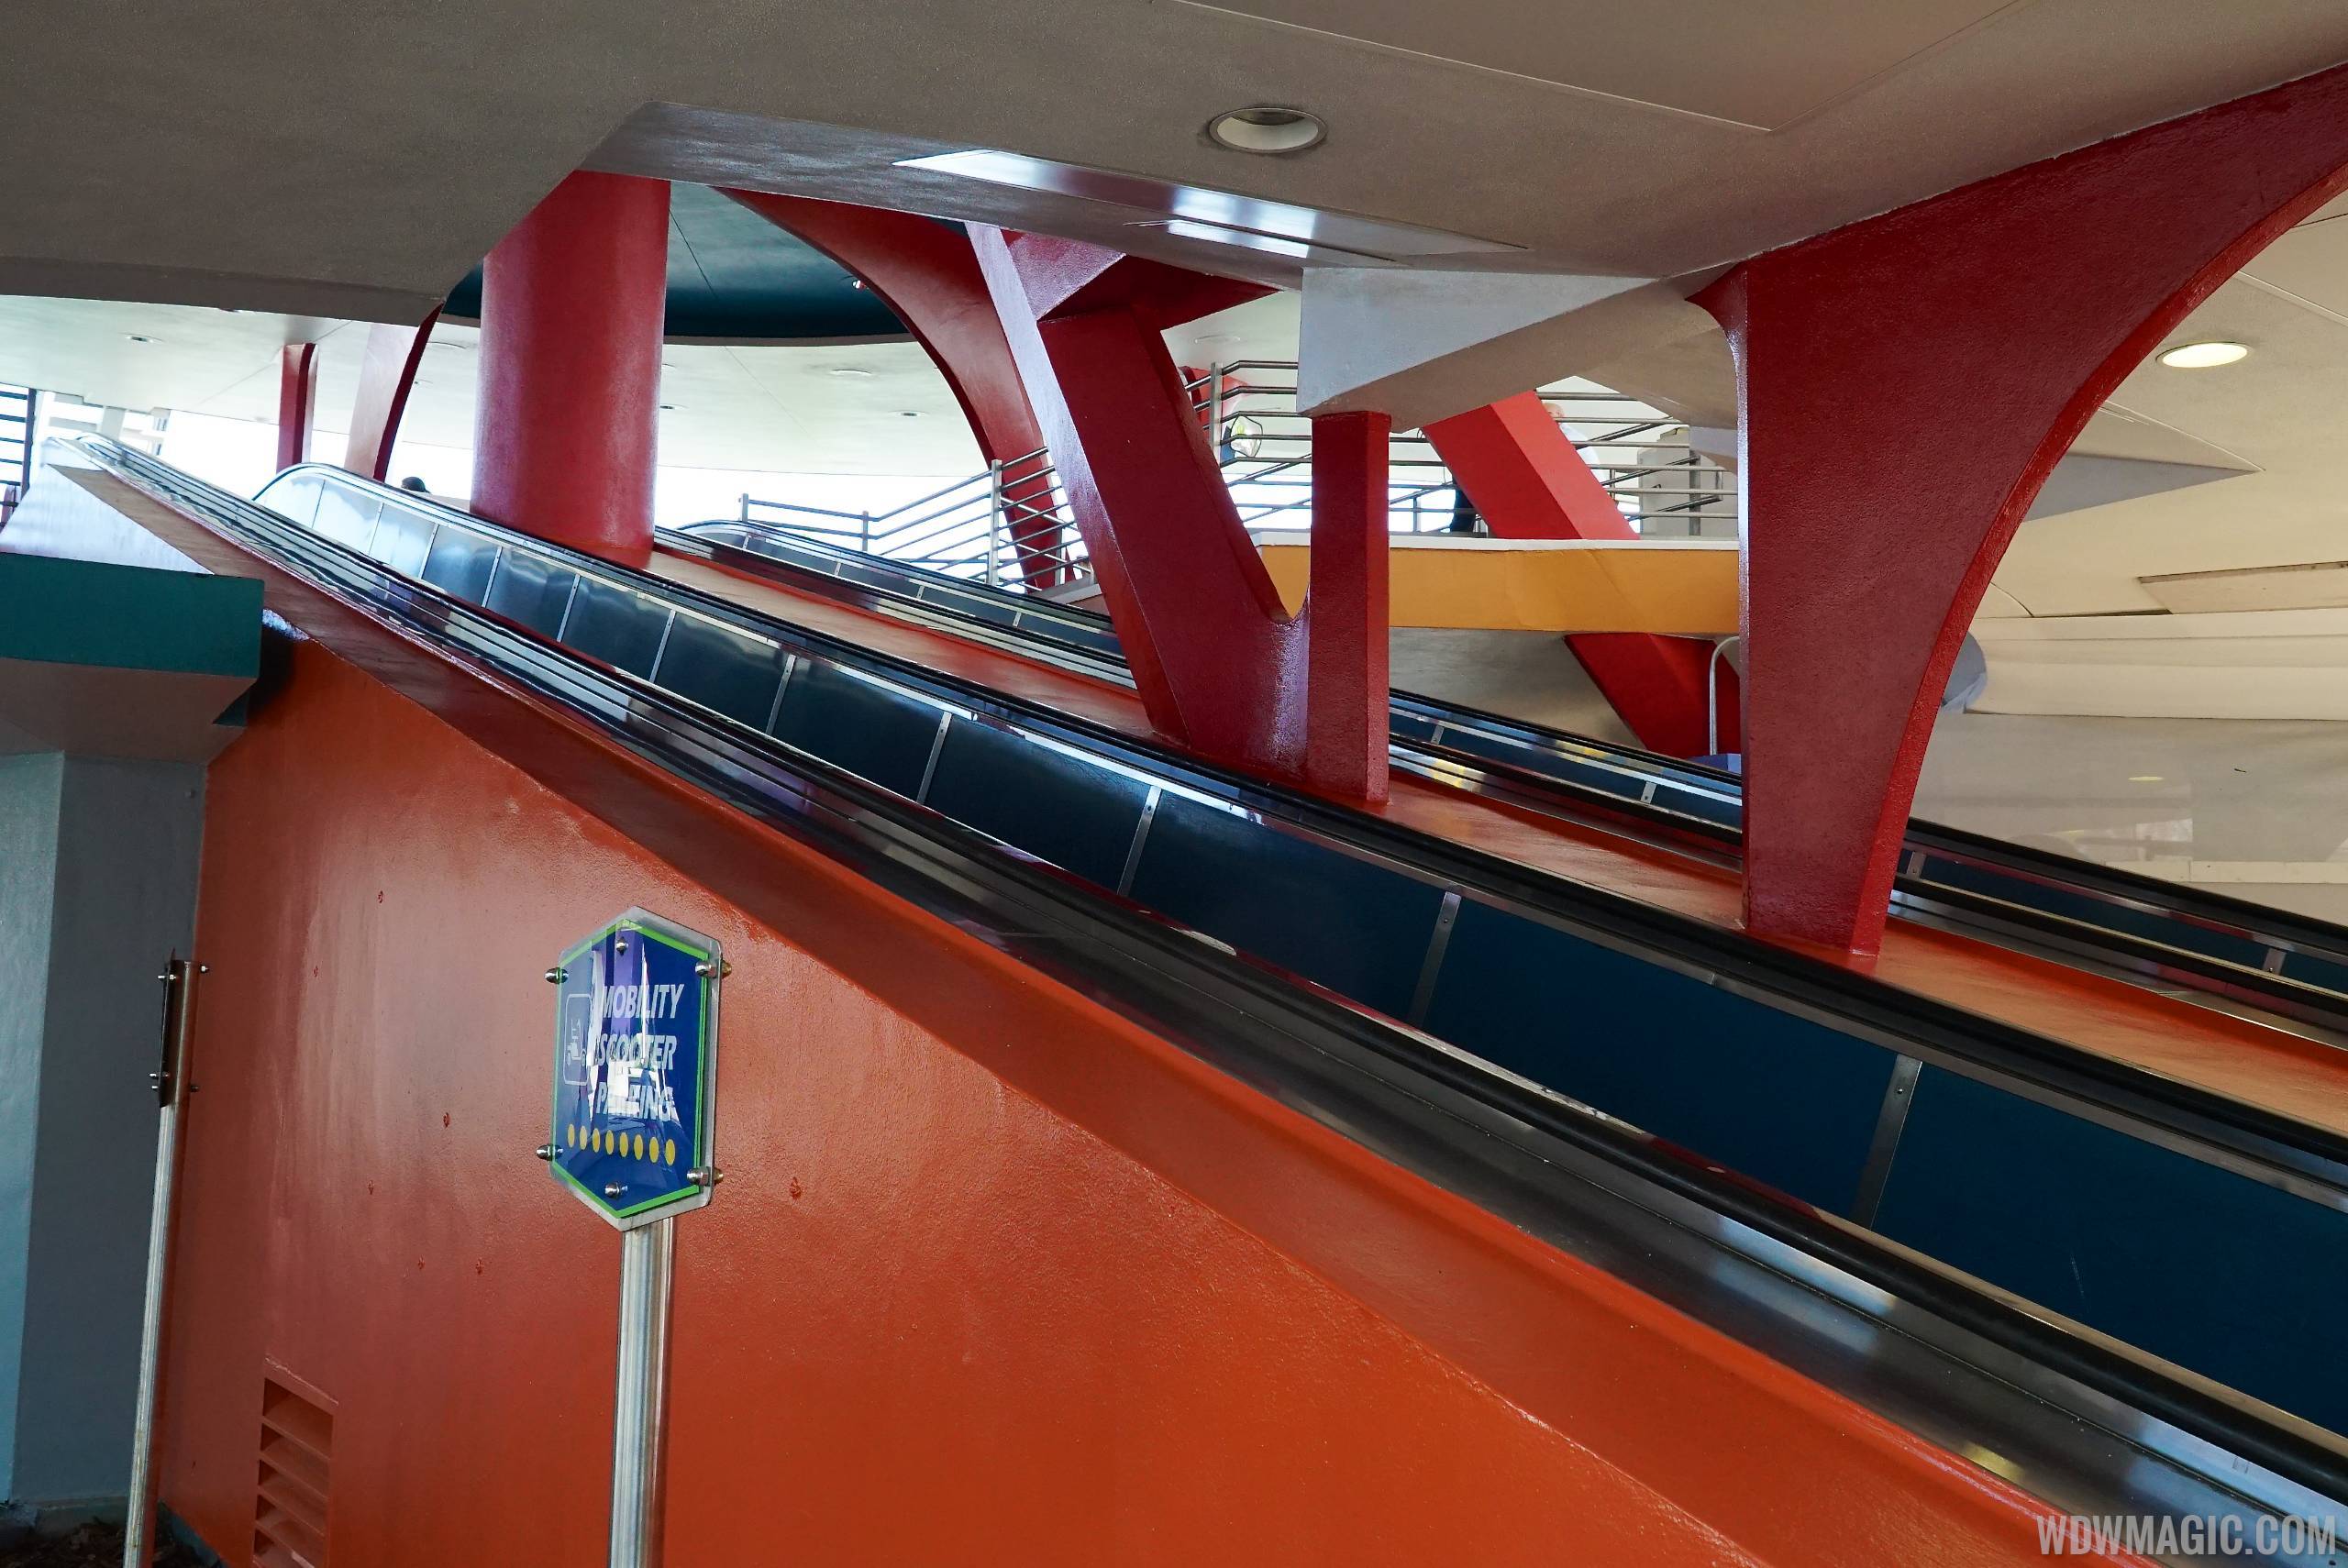 PHOTOS - Tomorrowland Transit Authority PeopleMover reopens with new color scheme